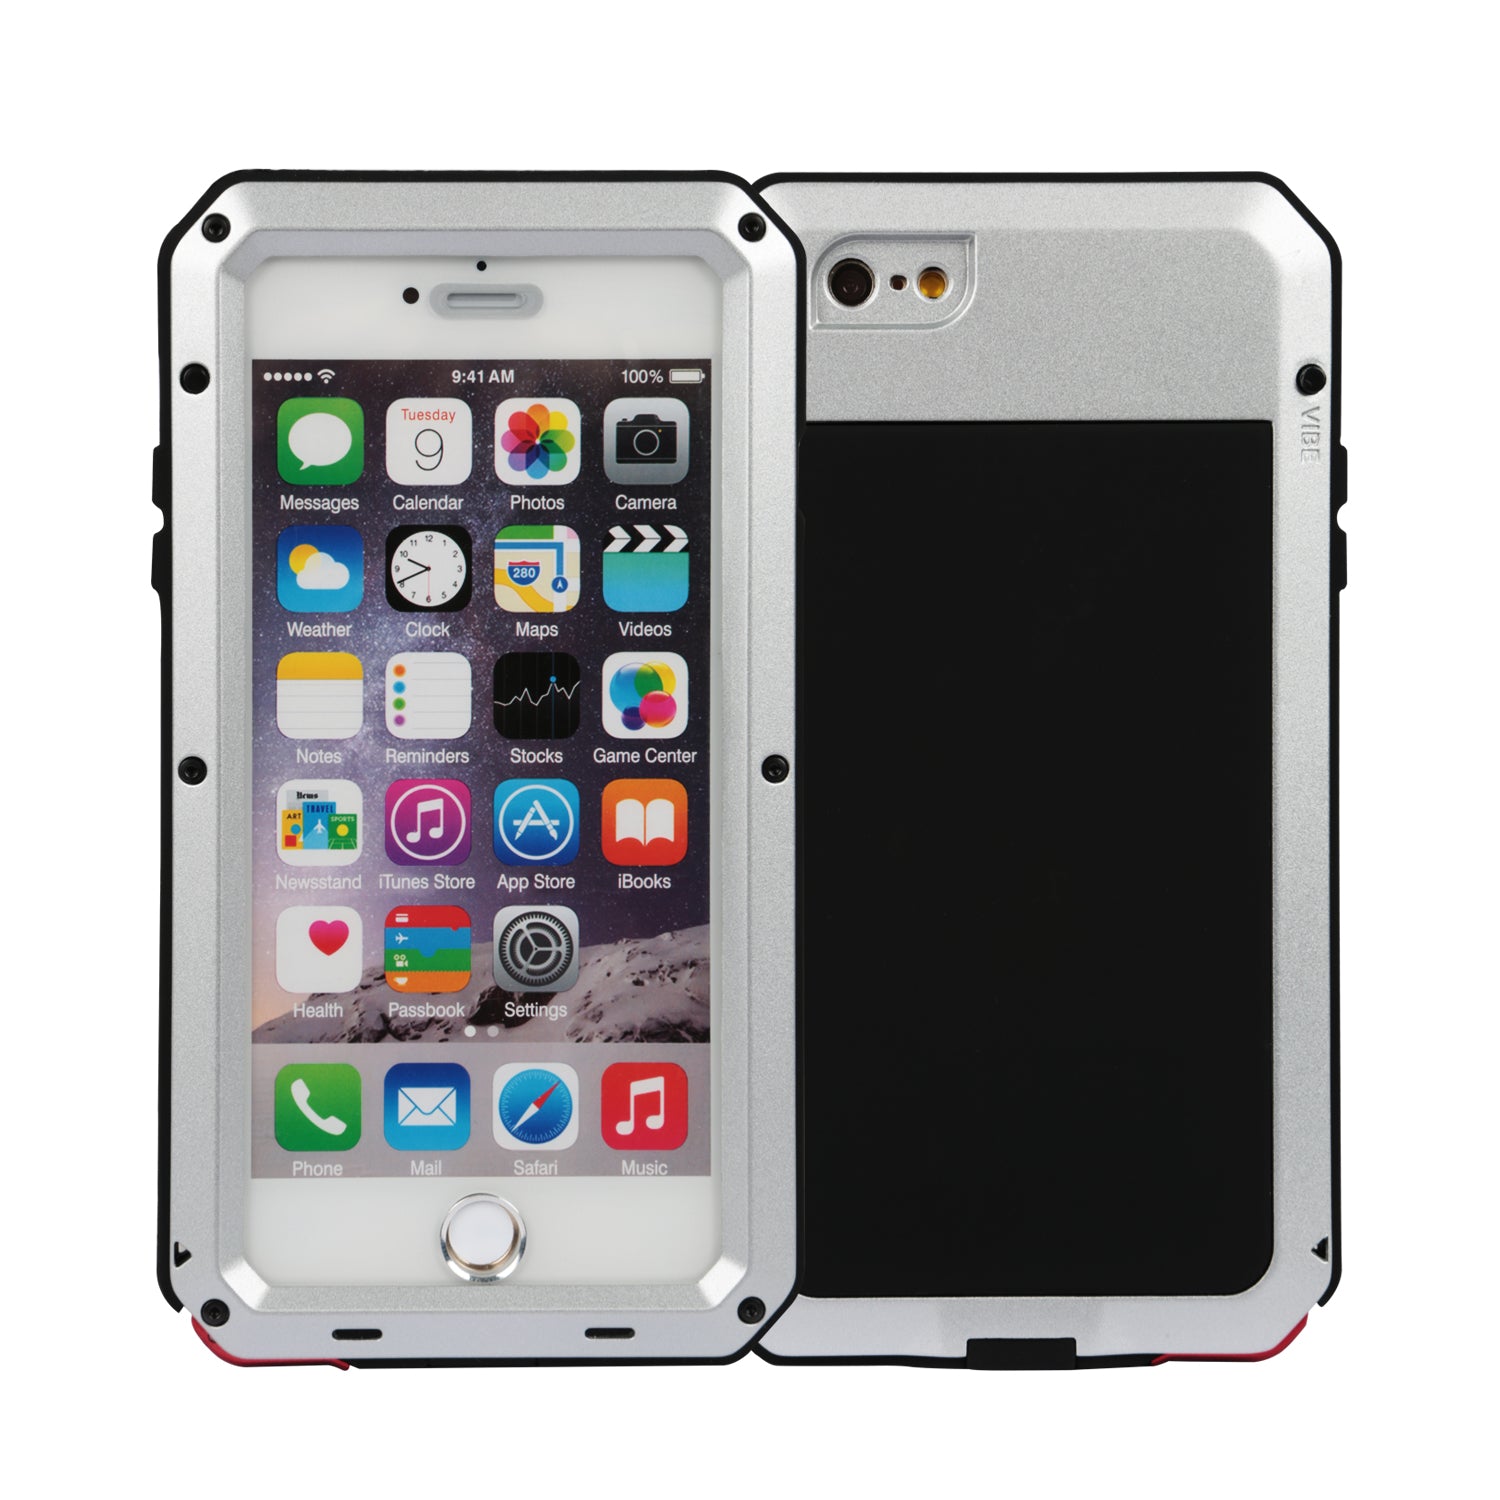 title:Rugged Shock-Resistant Hybrid Full Cover Case For iPhone 6 Plus;color:Silver